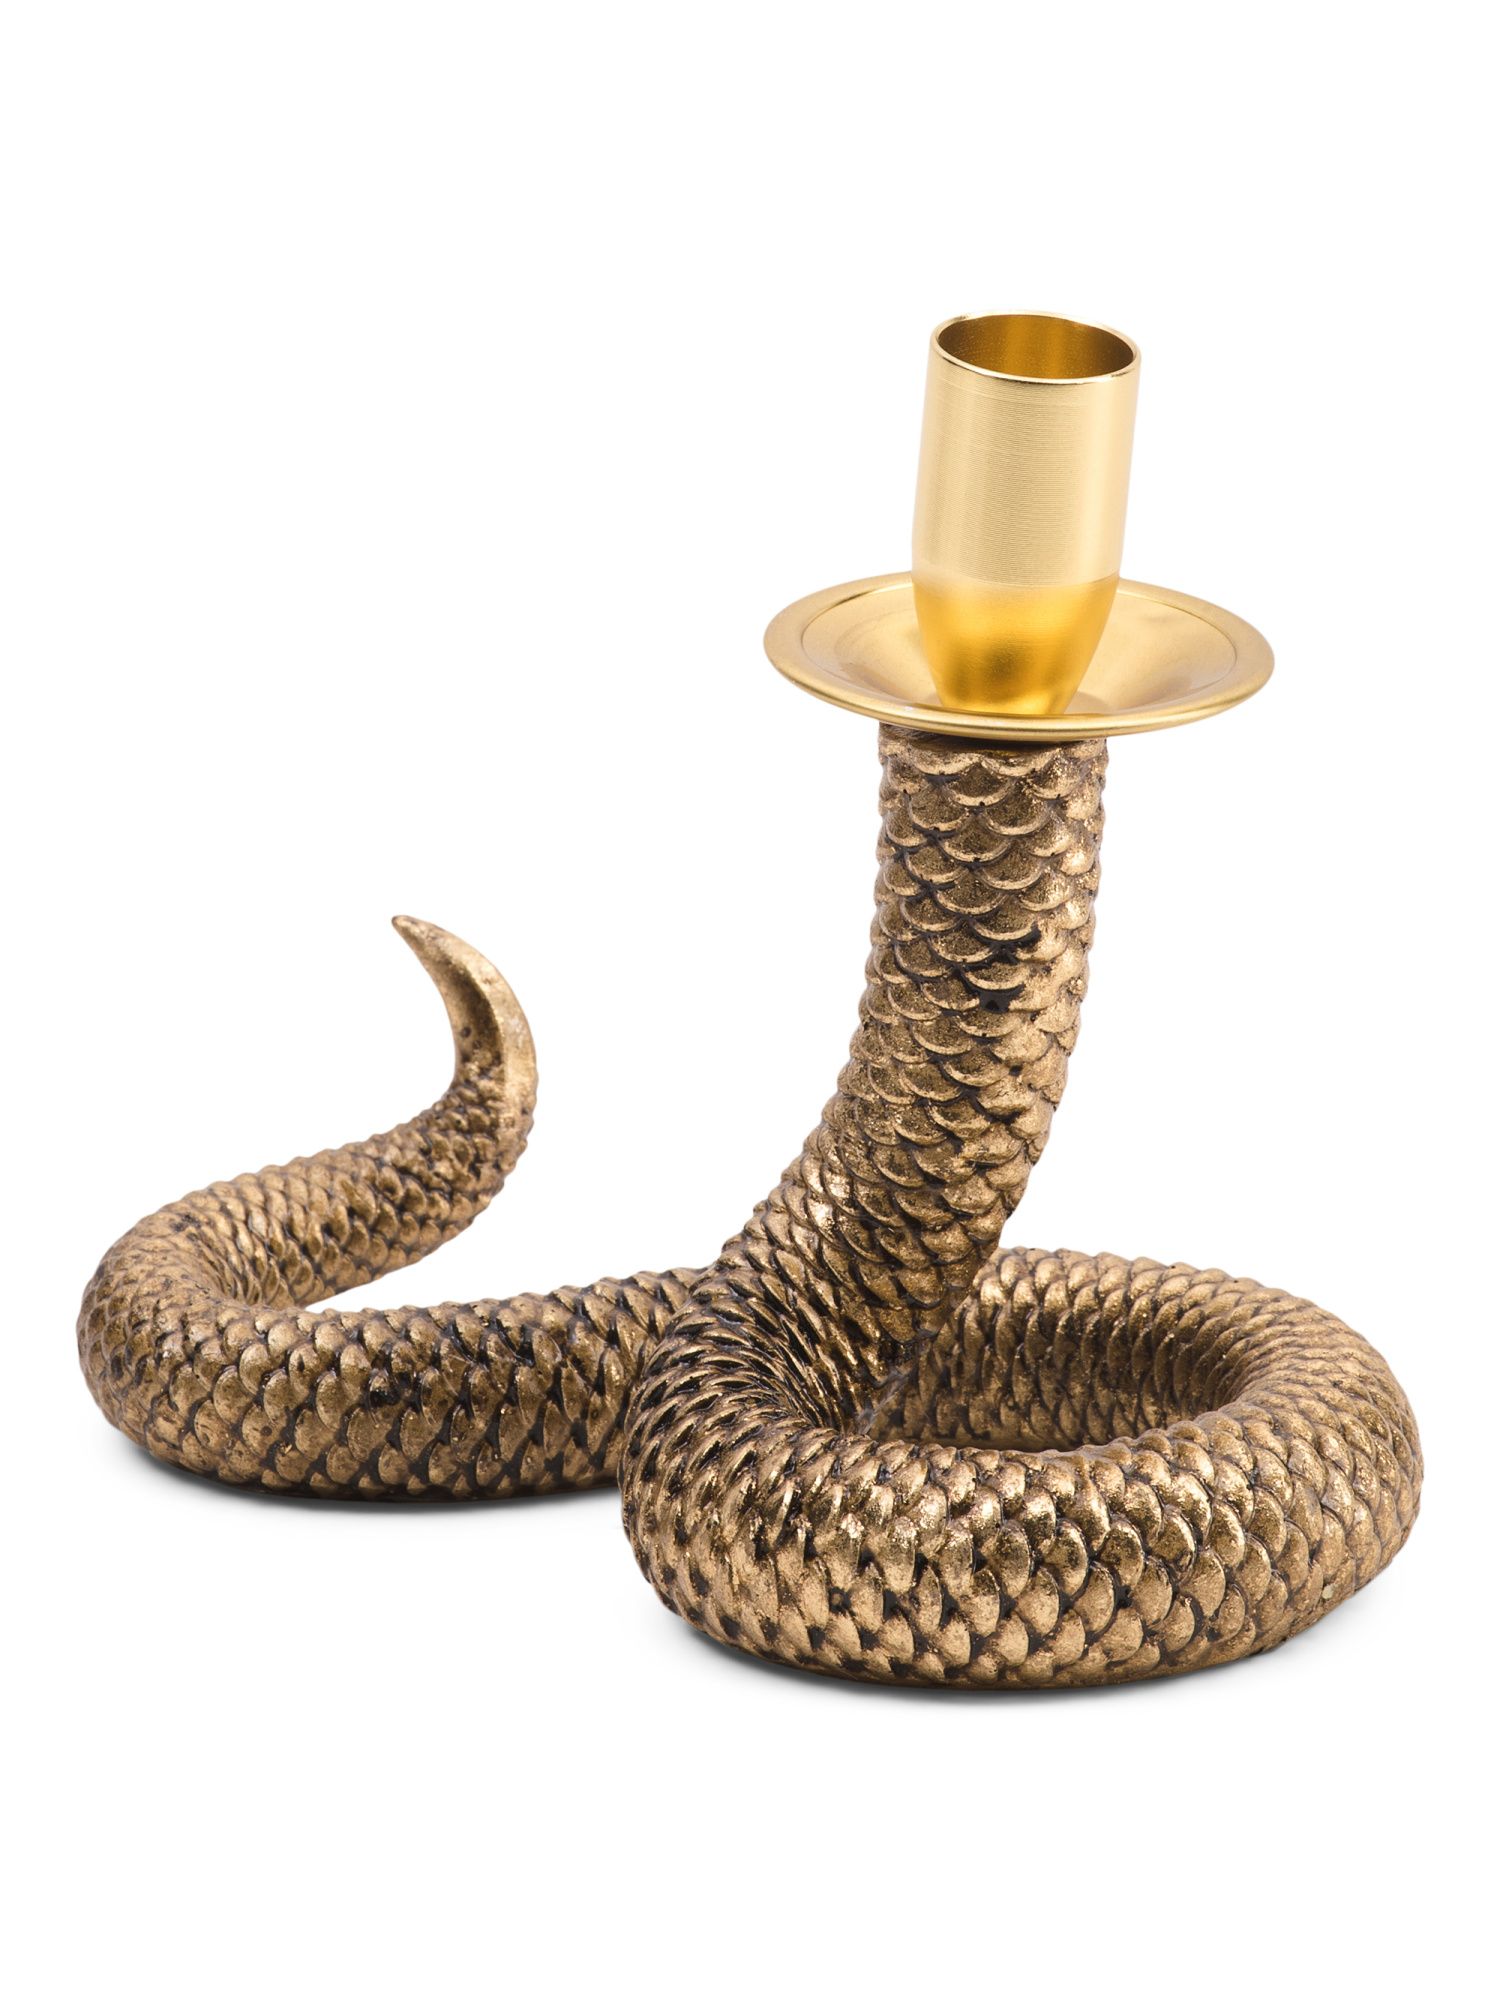 Snake Candle Holder | TJ Maxx